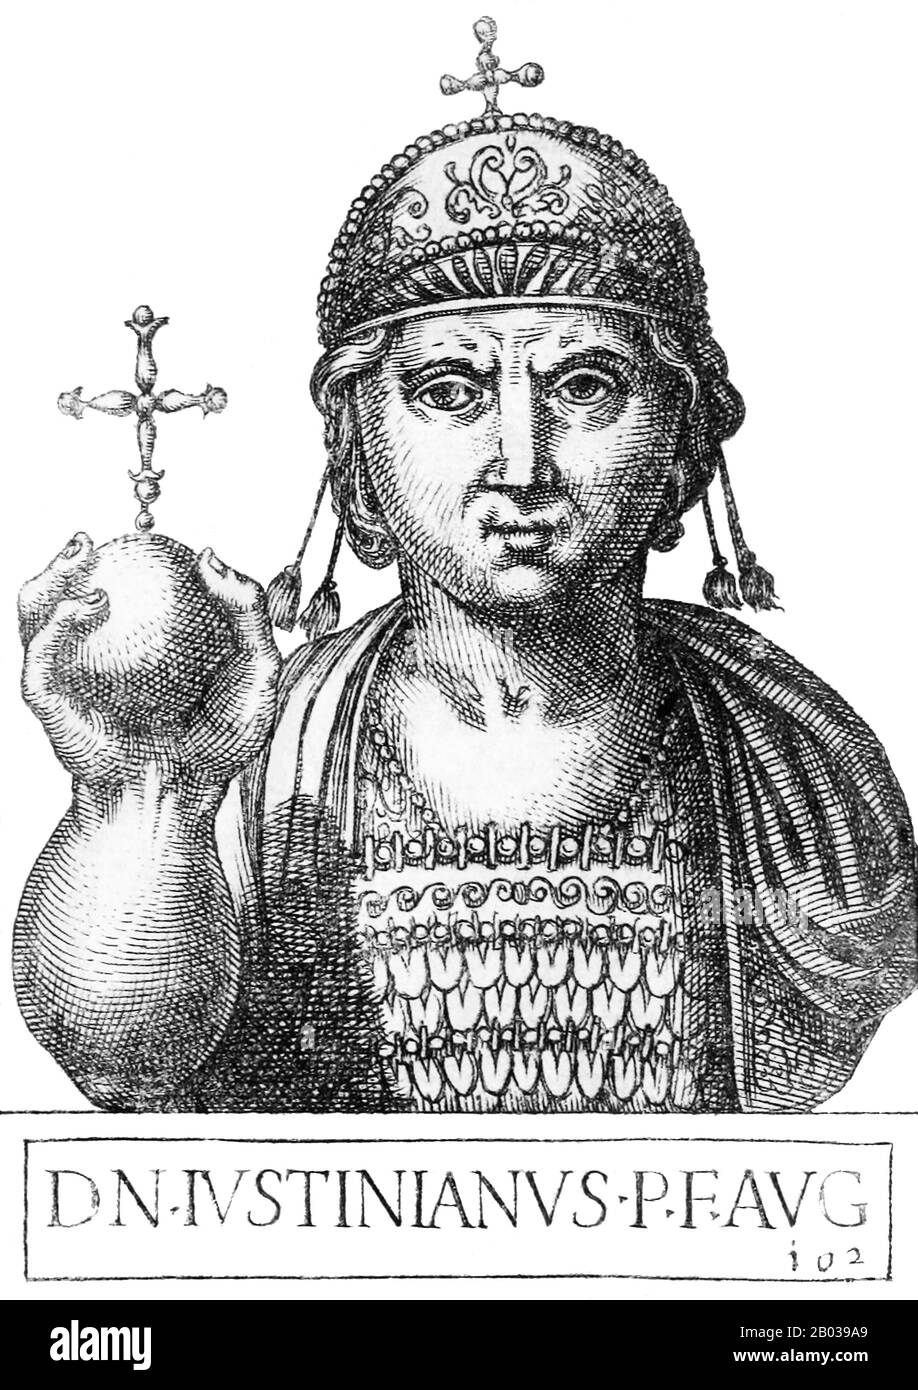 Justinian II (668-711), later known as Justinian the Slit-Nosed, was the eldest son of Emperor Constantine IV, and became joint emperor in 681. He later succeeded his father as sole emperor in 685, aged sixteen. Justinian was ambitious and passionate, wishing to restore the emperor to former glories and past successes.  However, Justinian's lack of finesse and his poor attitude towards any opposition to his will led to resistance throughout his reign. He was eventually deposed in a popular uprising led by Leontios in 695, who proclaimed himself emperor and exiled Justinian after having his nos Stock Photo